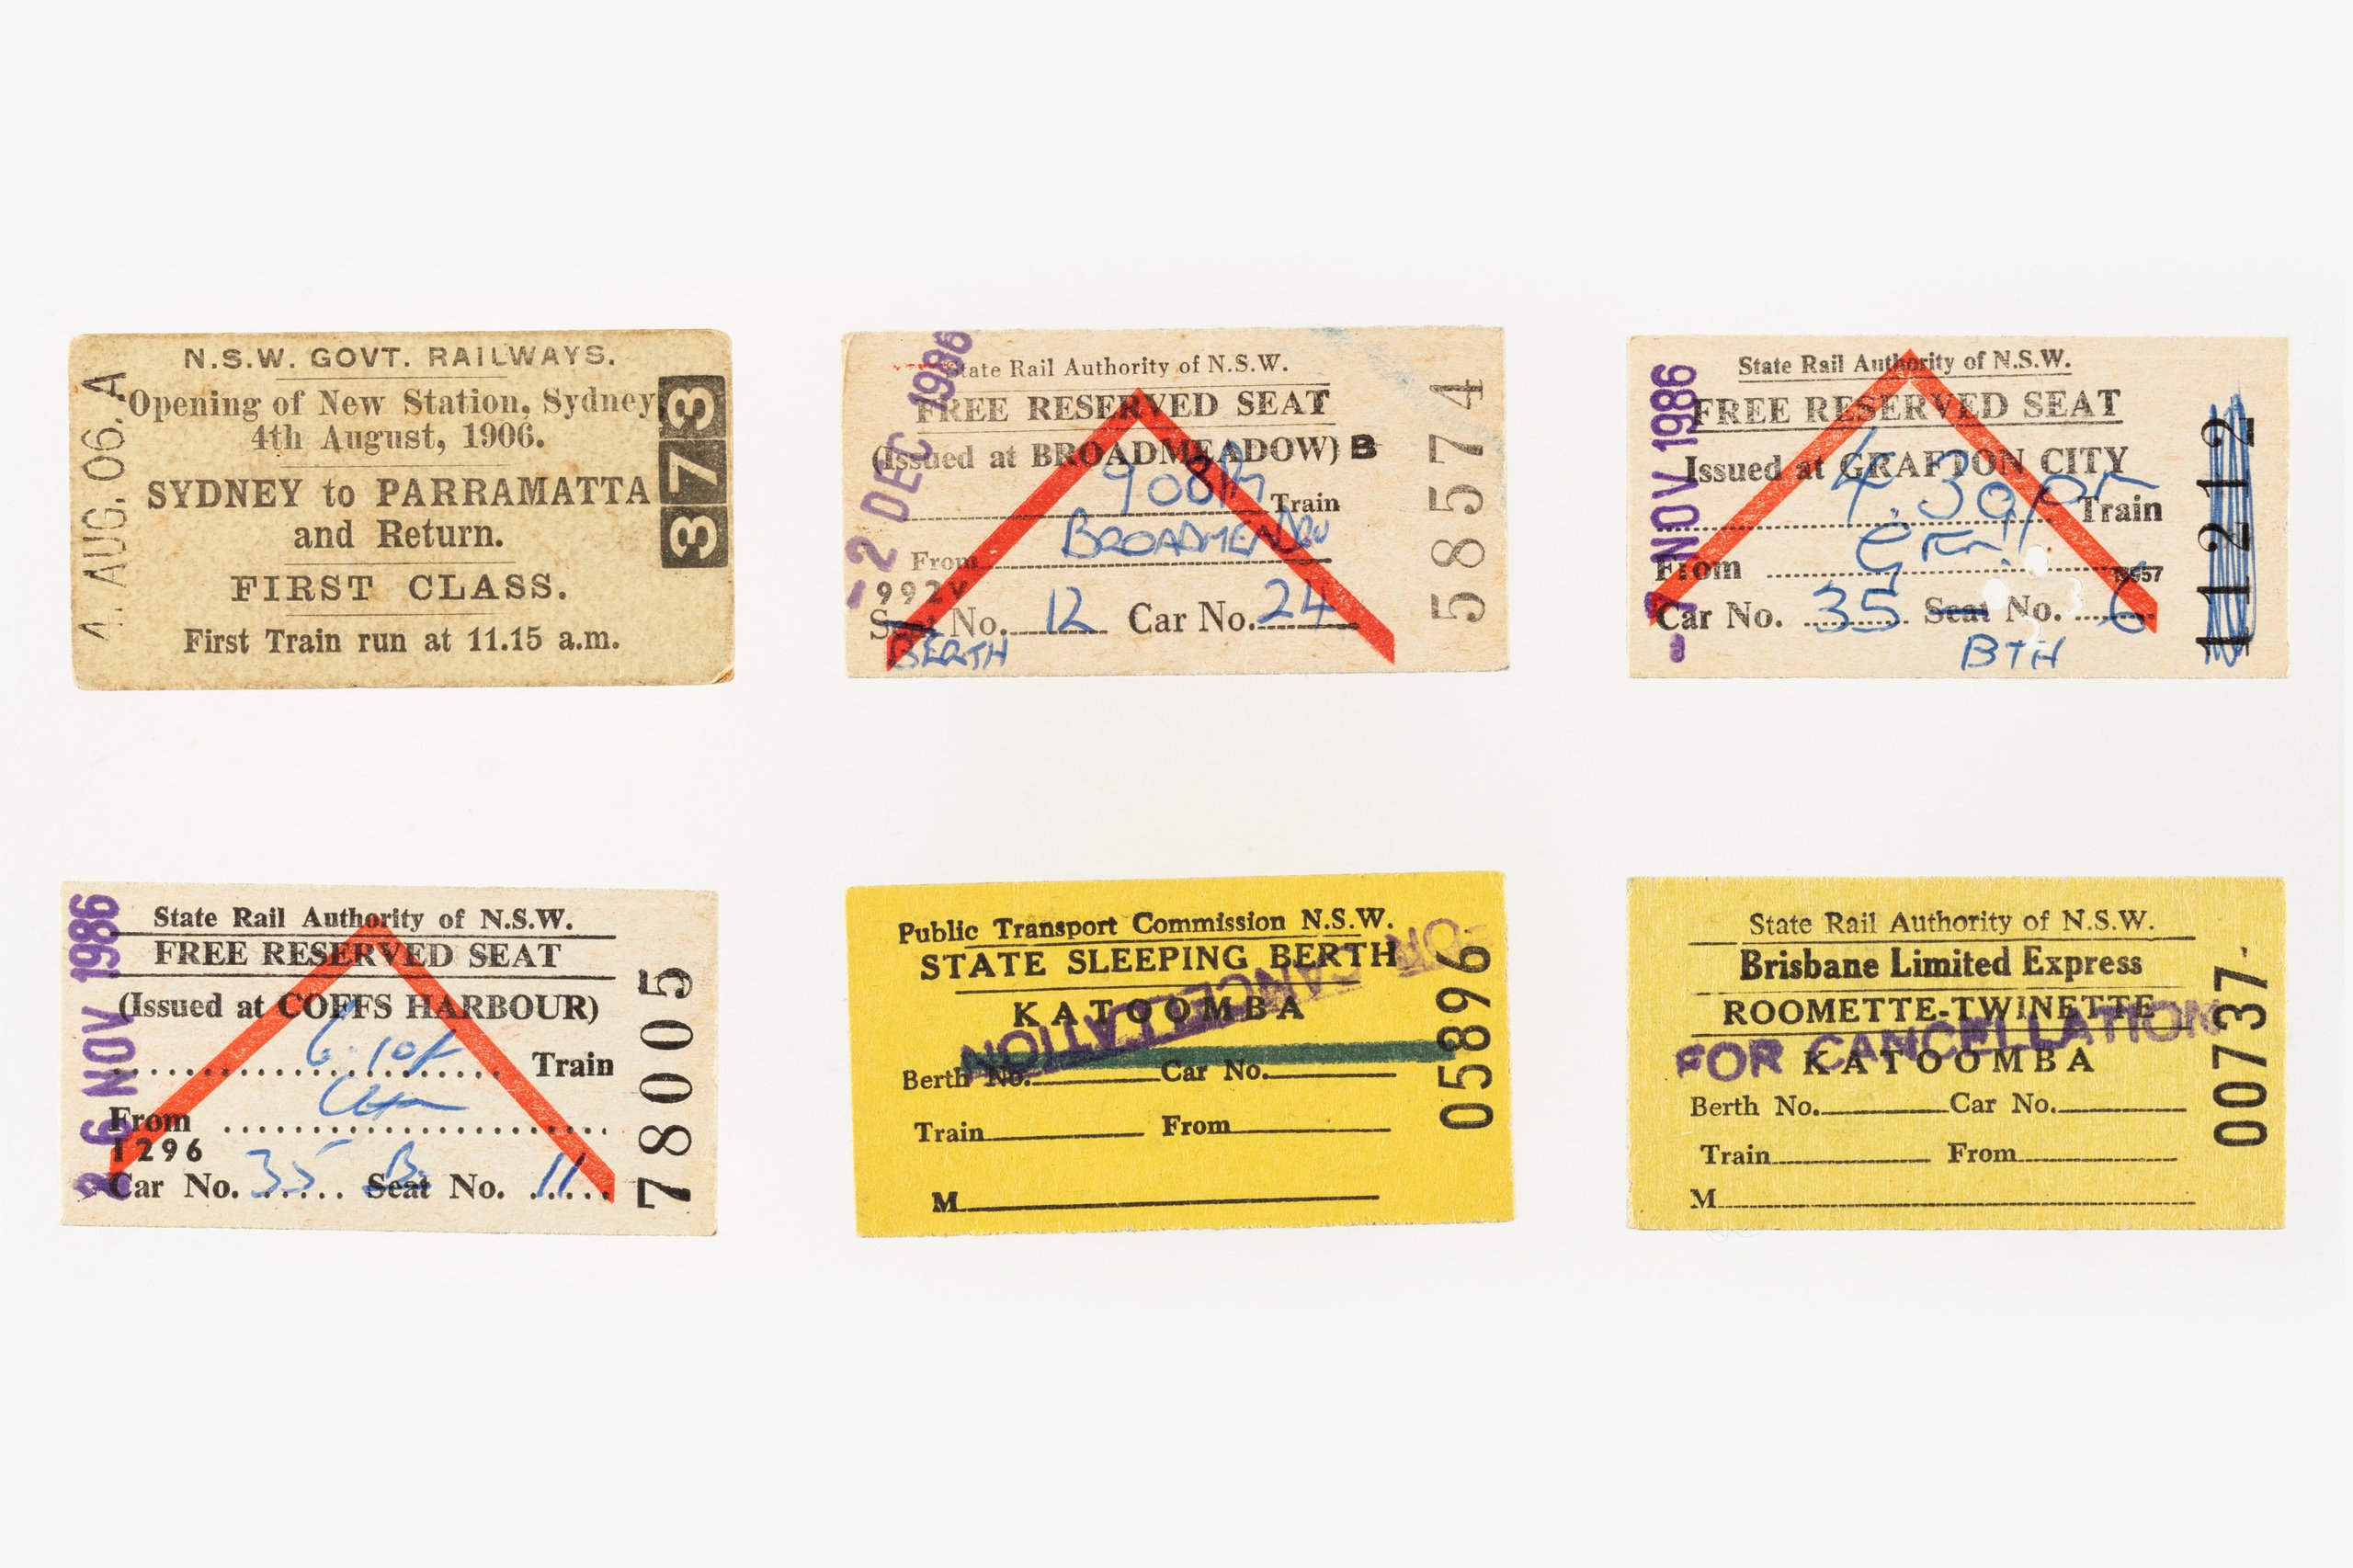 Railway tickets issued by NSW Government, Australia